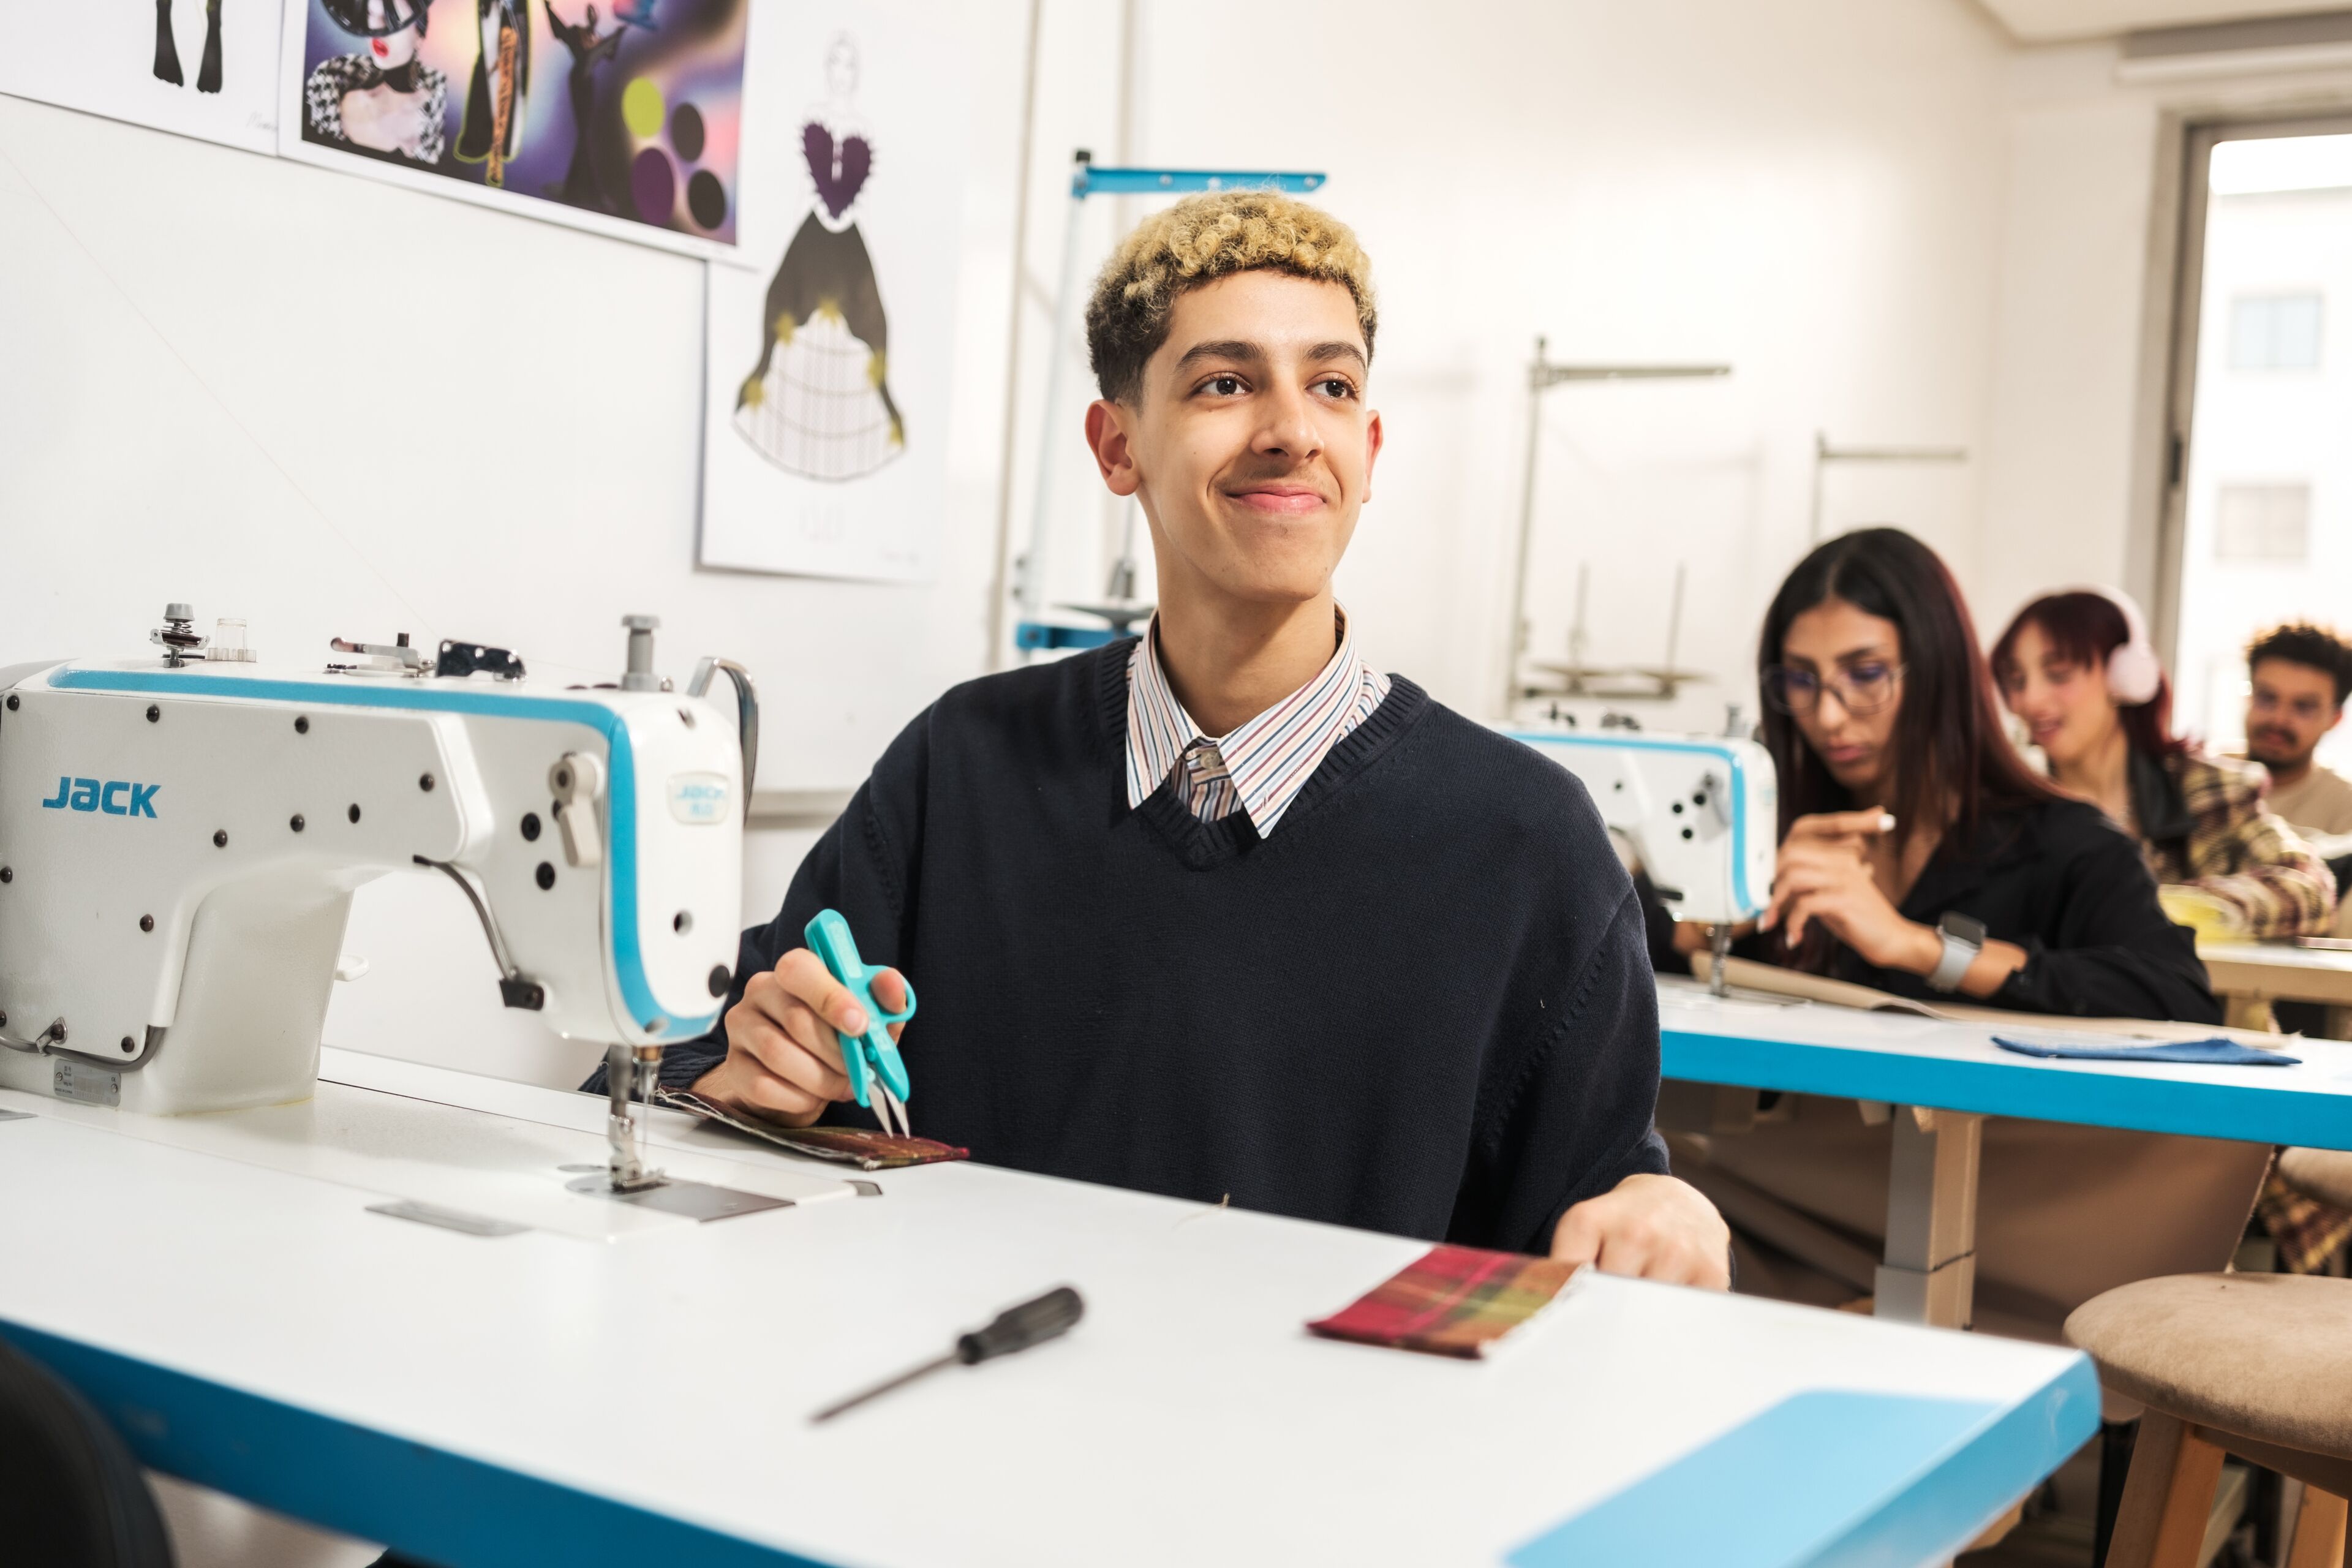 A young student with curly hair smiles, holding scissors in a fashion design class, sewing machines and focused classmates in the background.